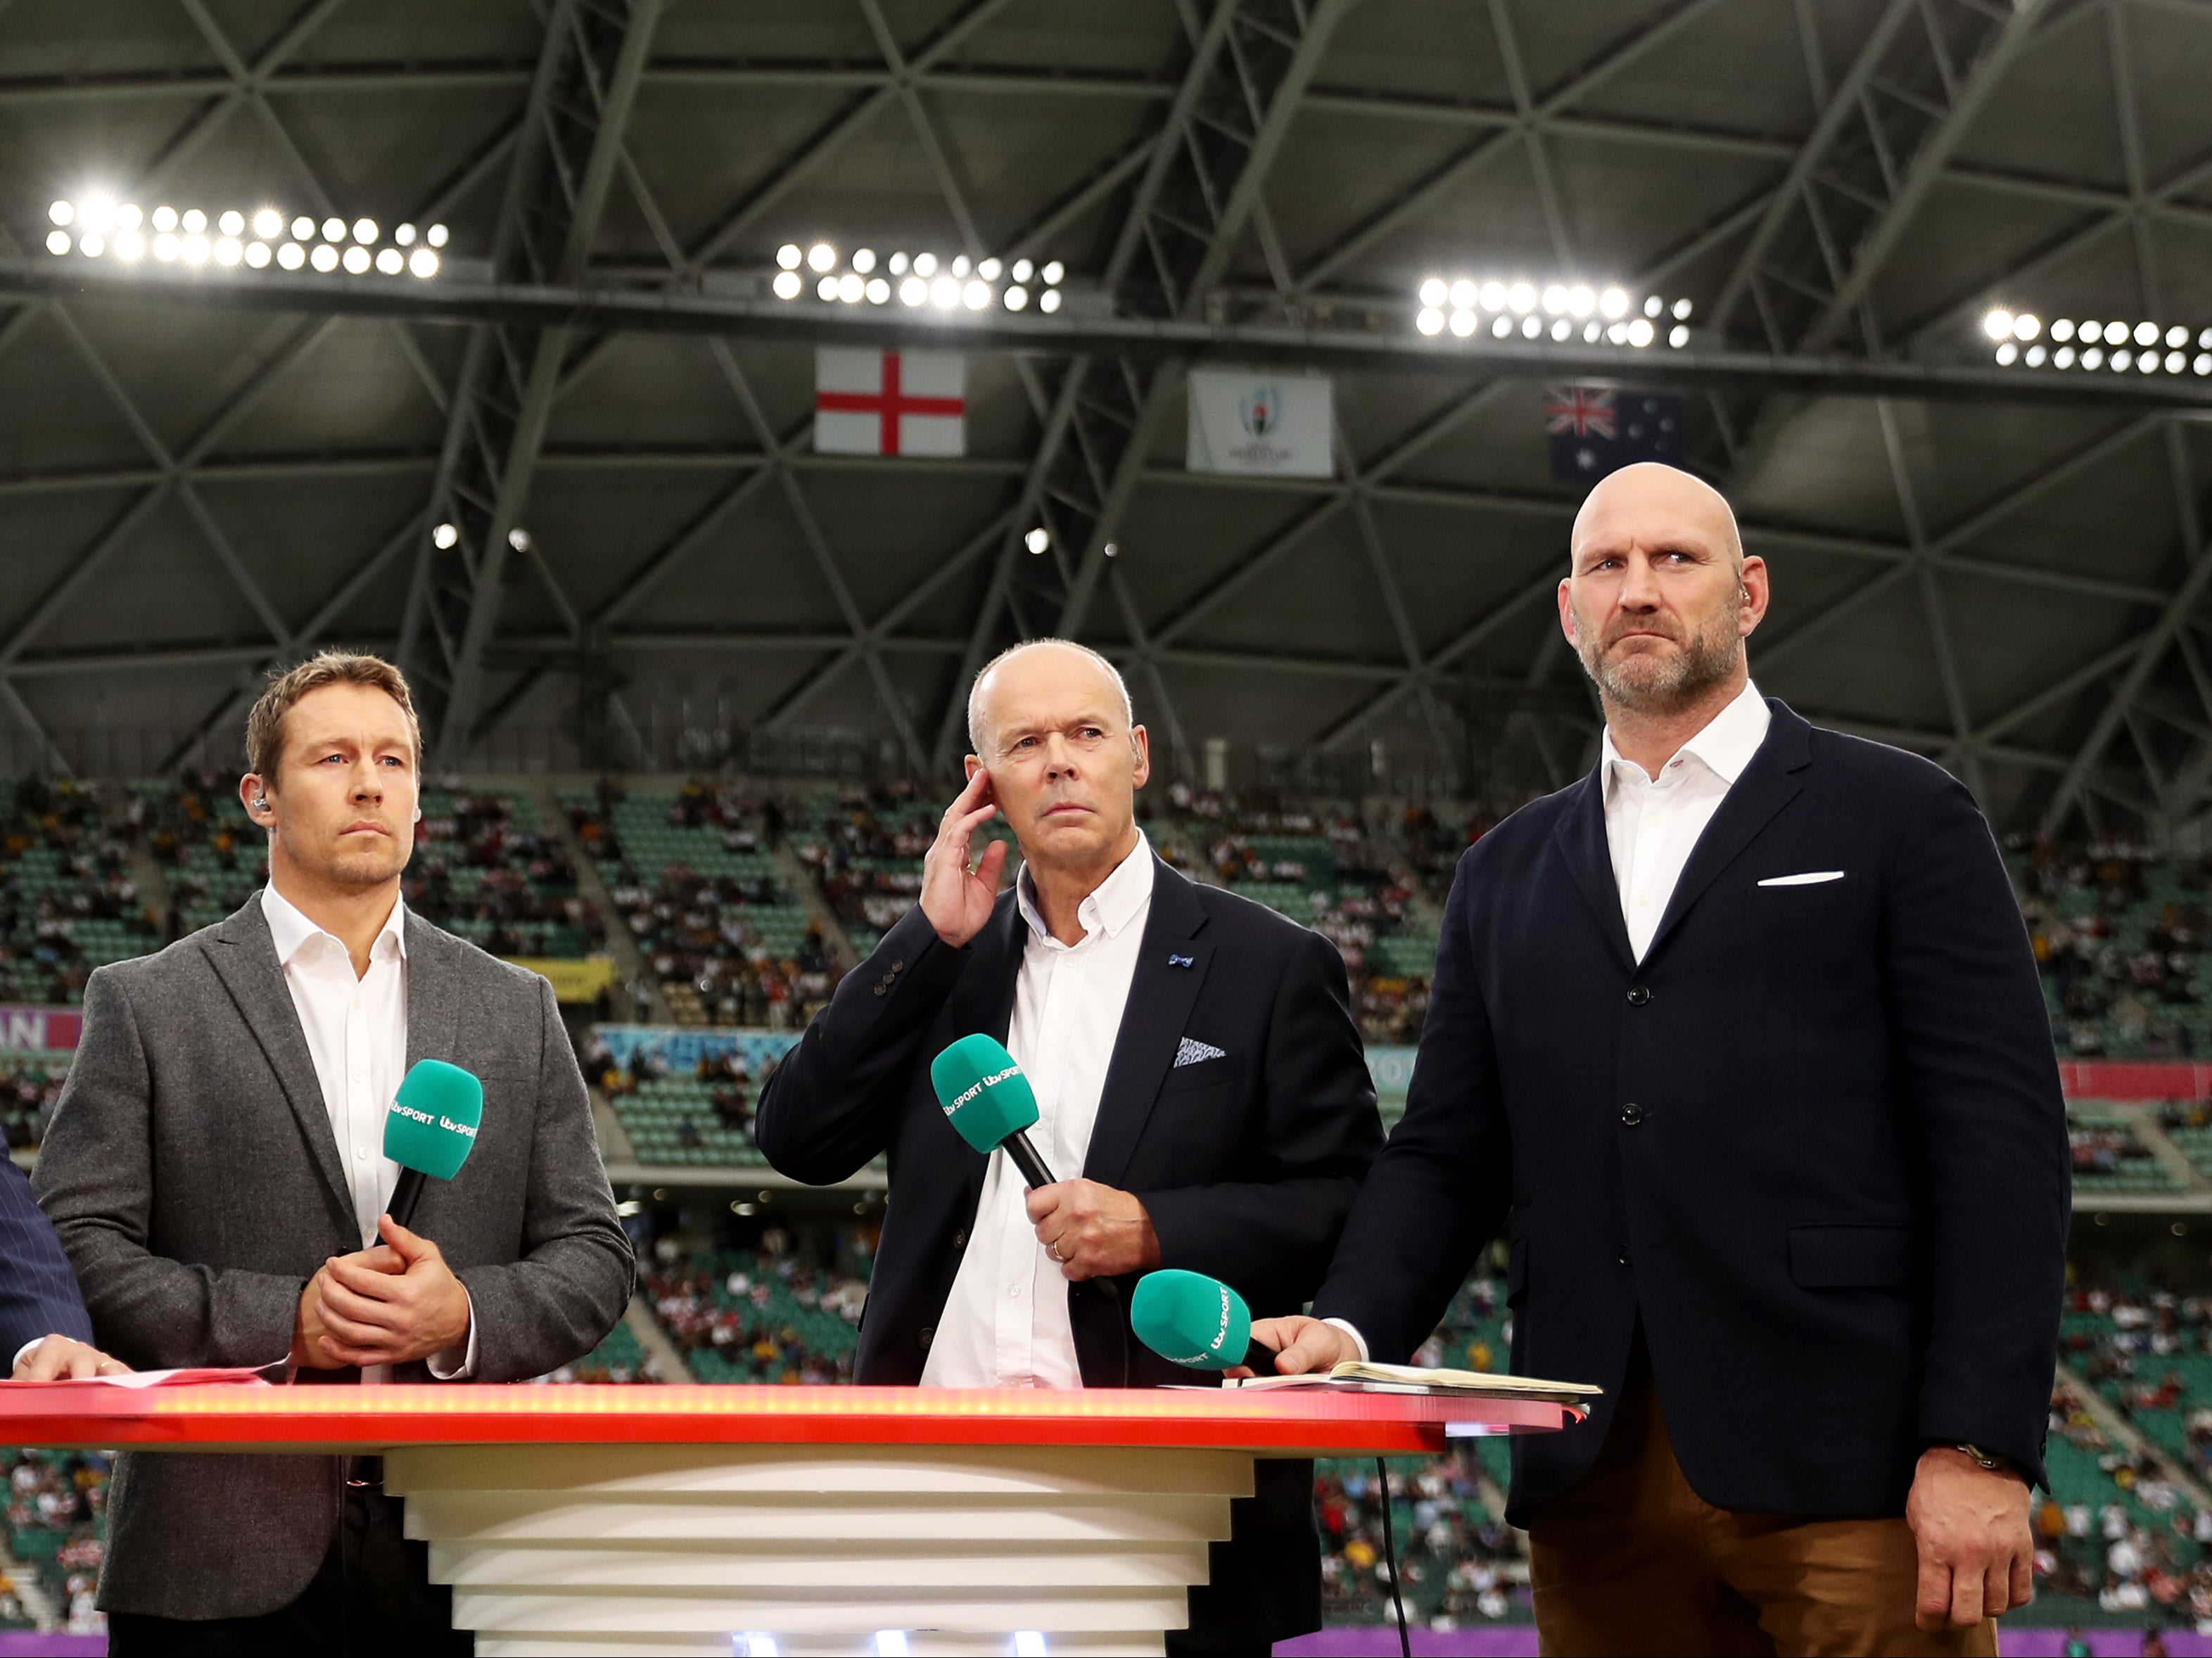 Rugby World Cup pundits, commentators and presenters for ITV The Independent